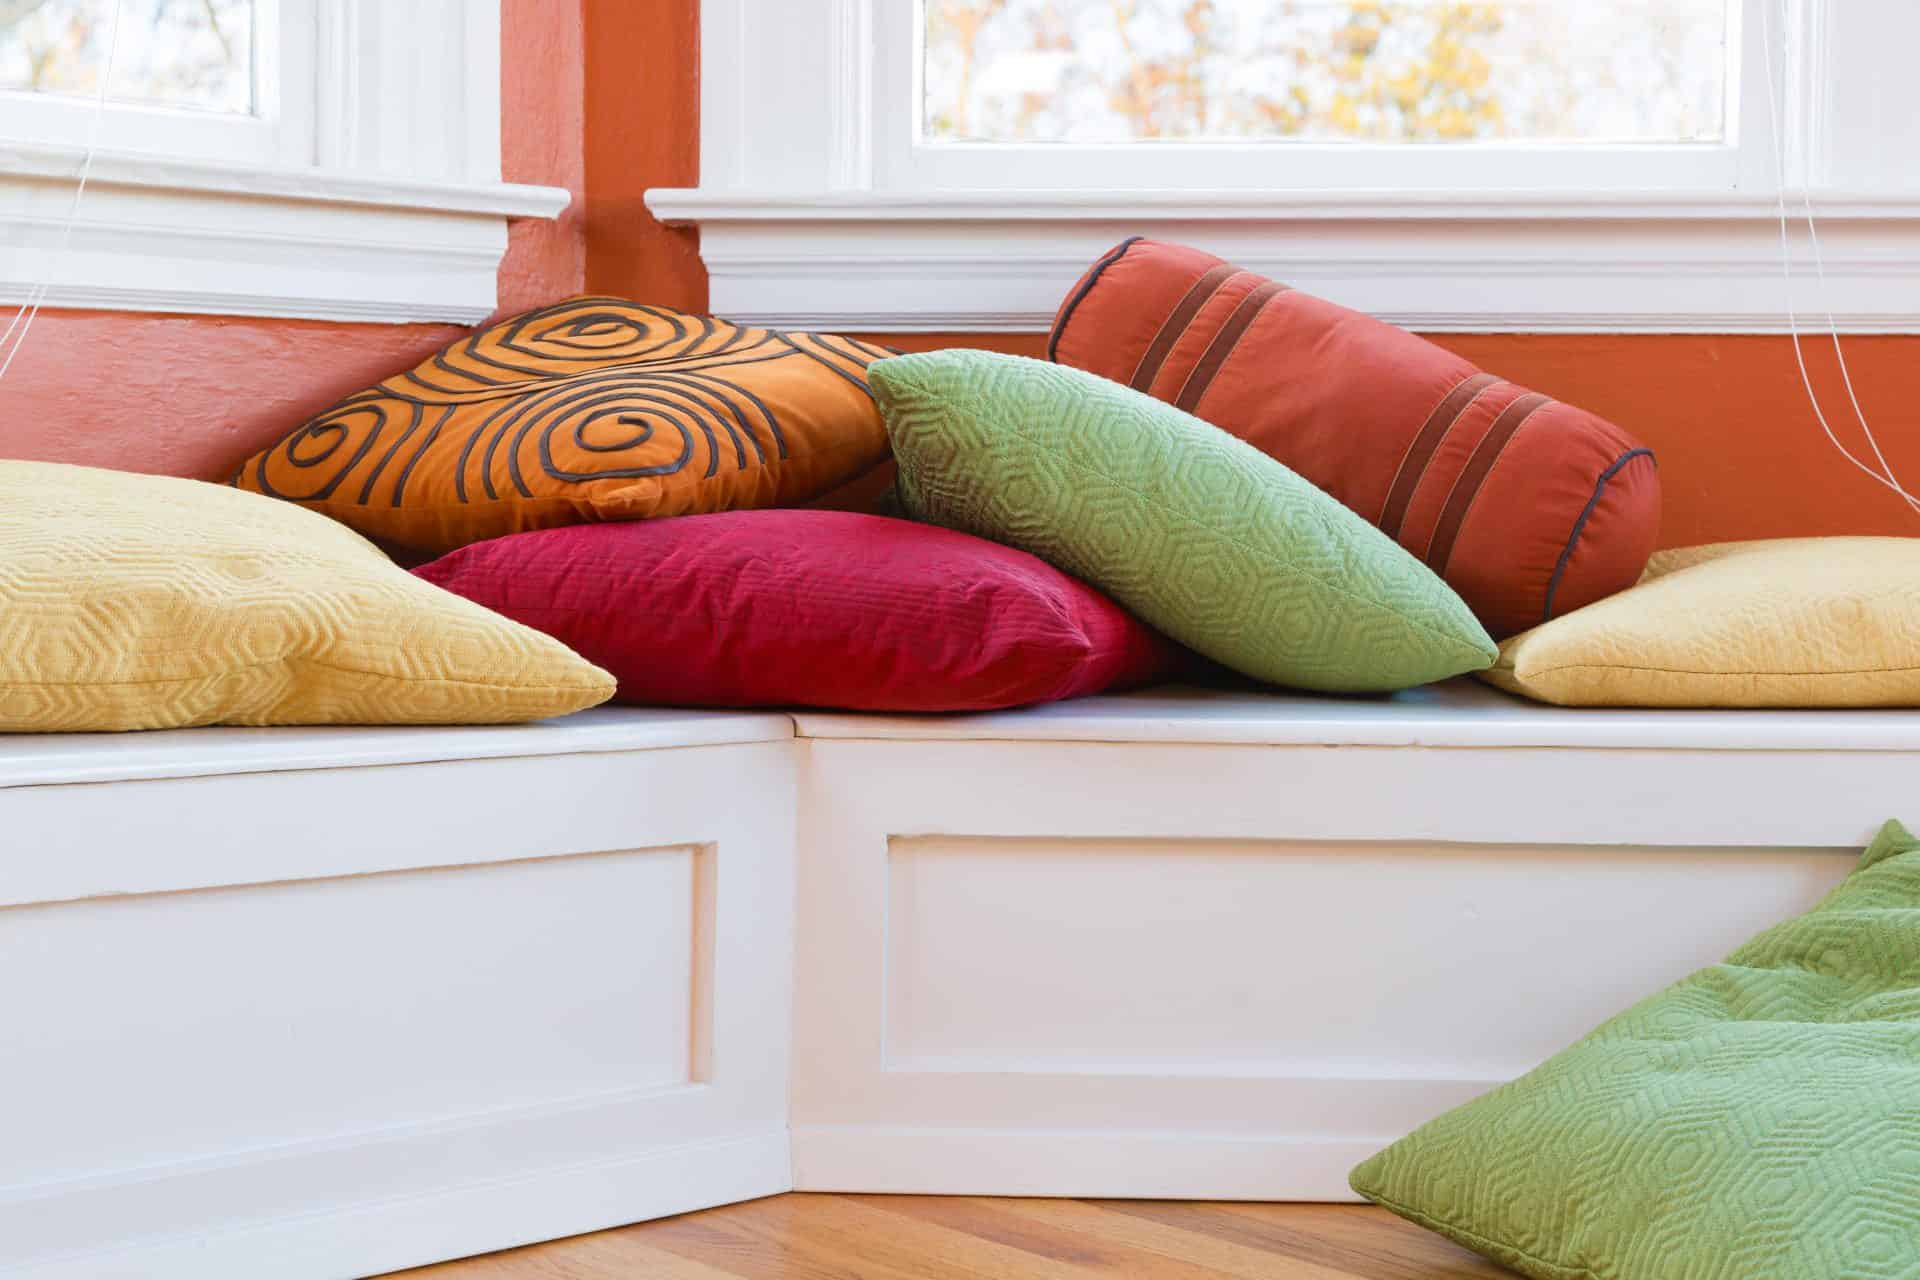 Colorful Pillows on a Banquette